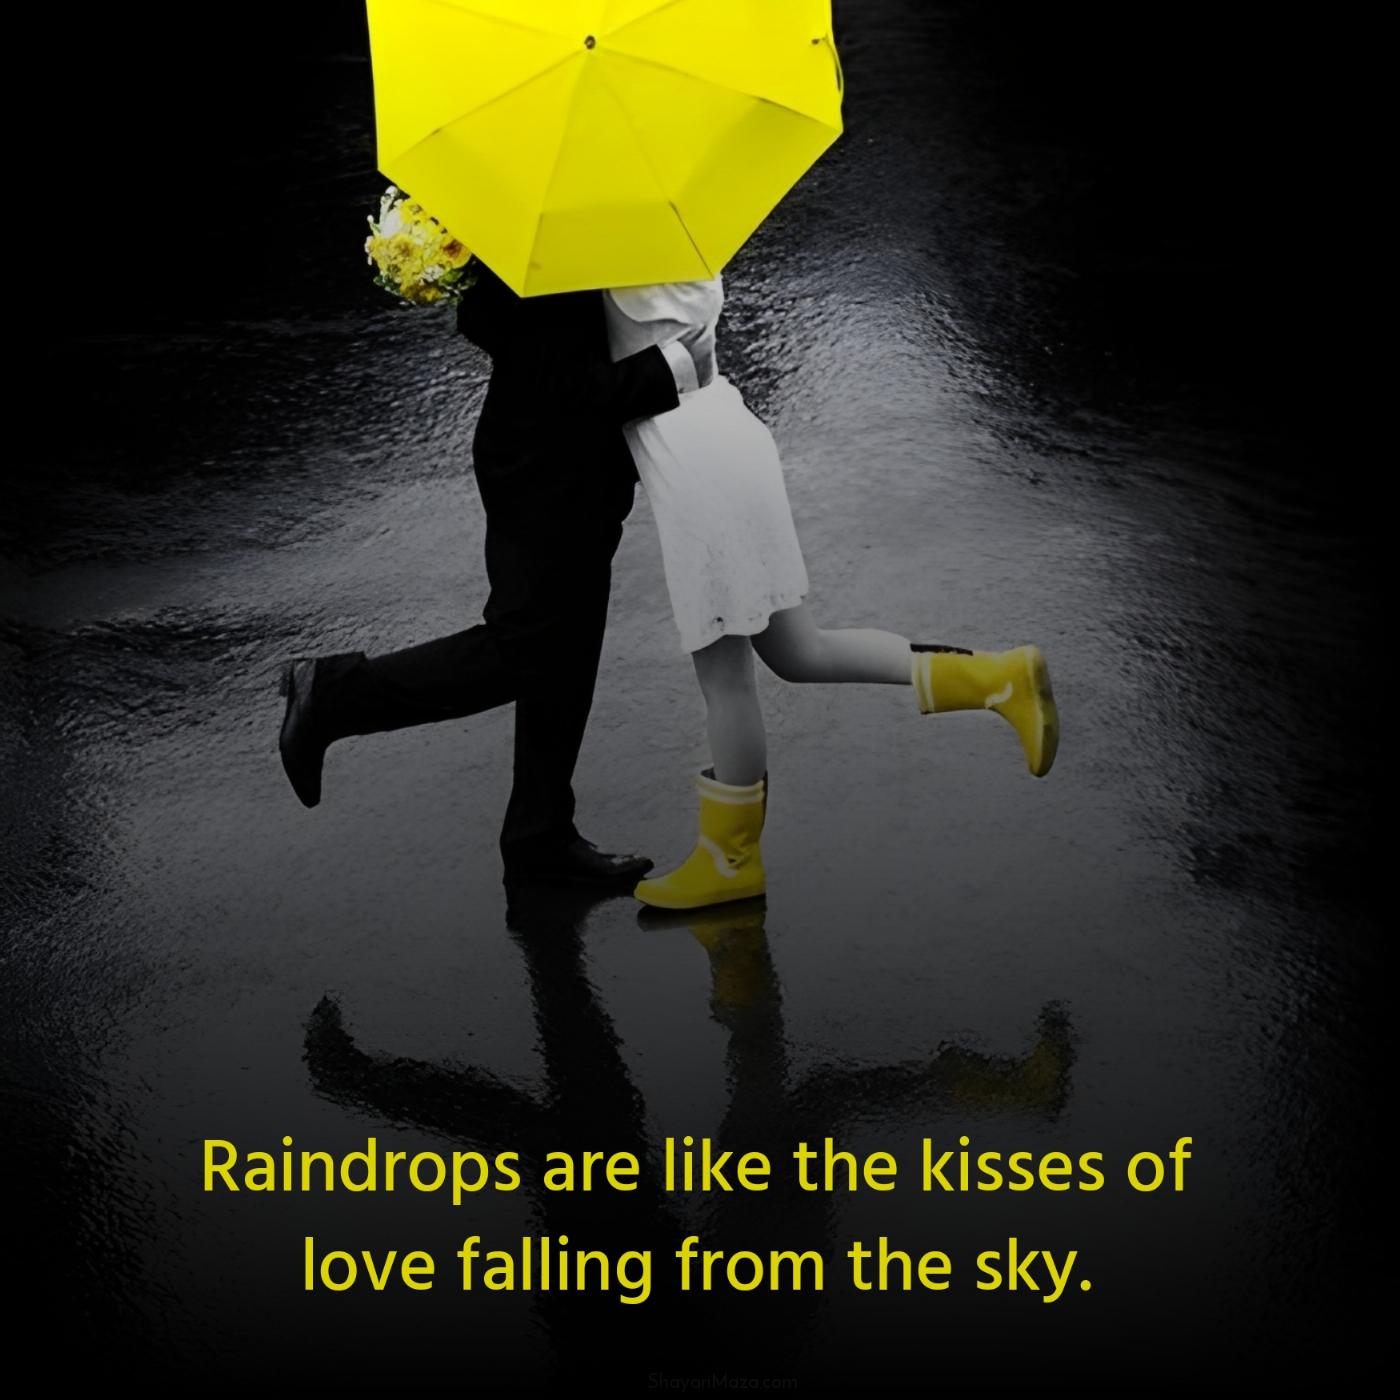 Raindrops are like the kisses of love falling from the sky